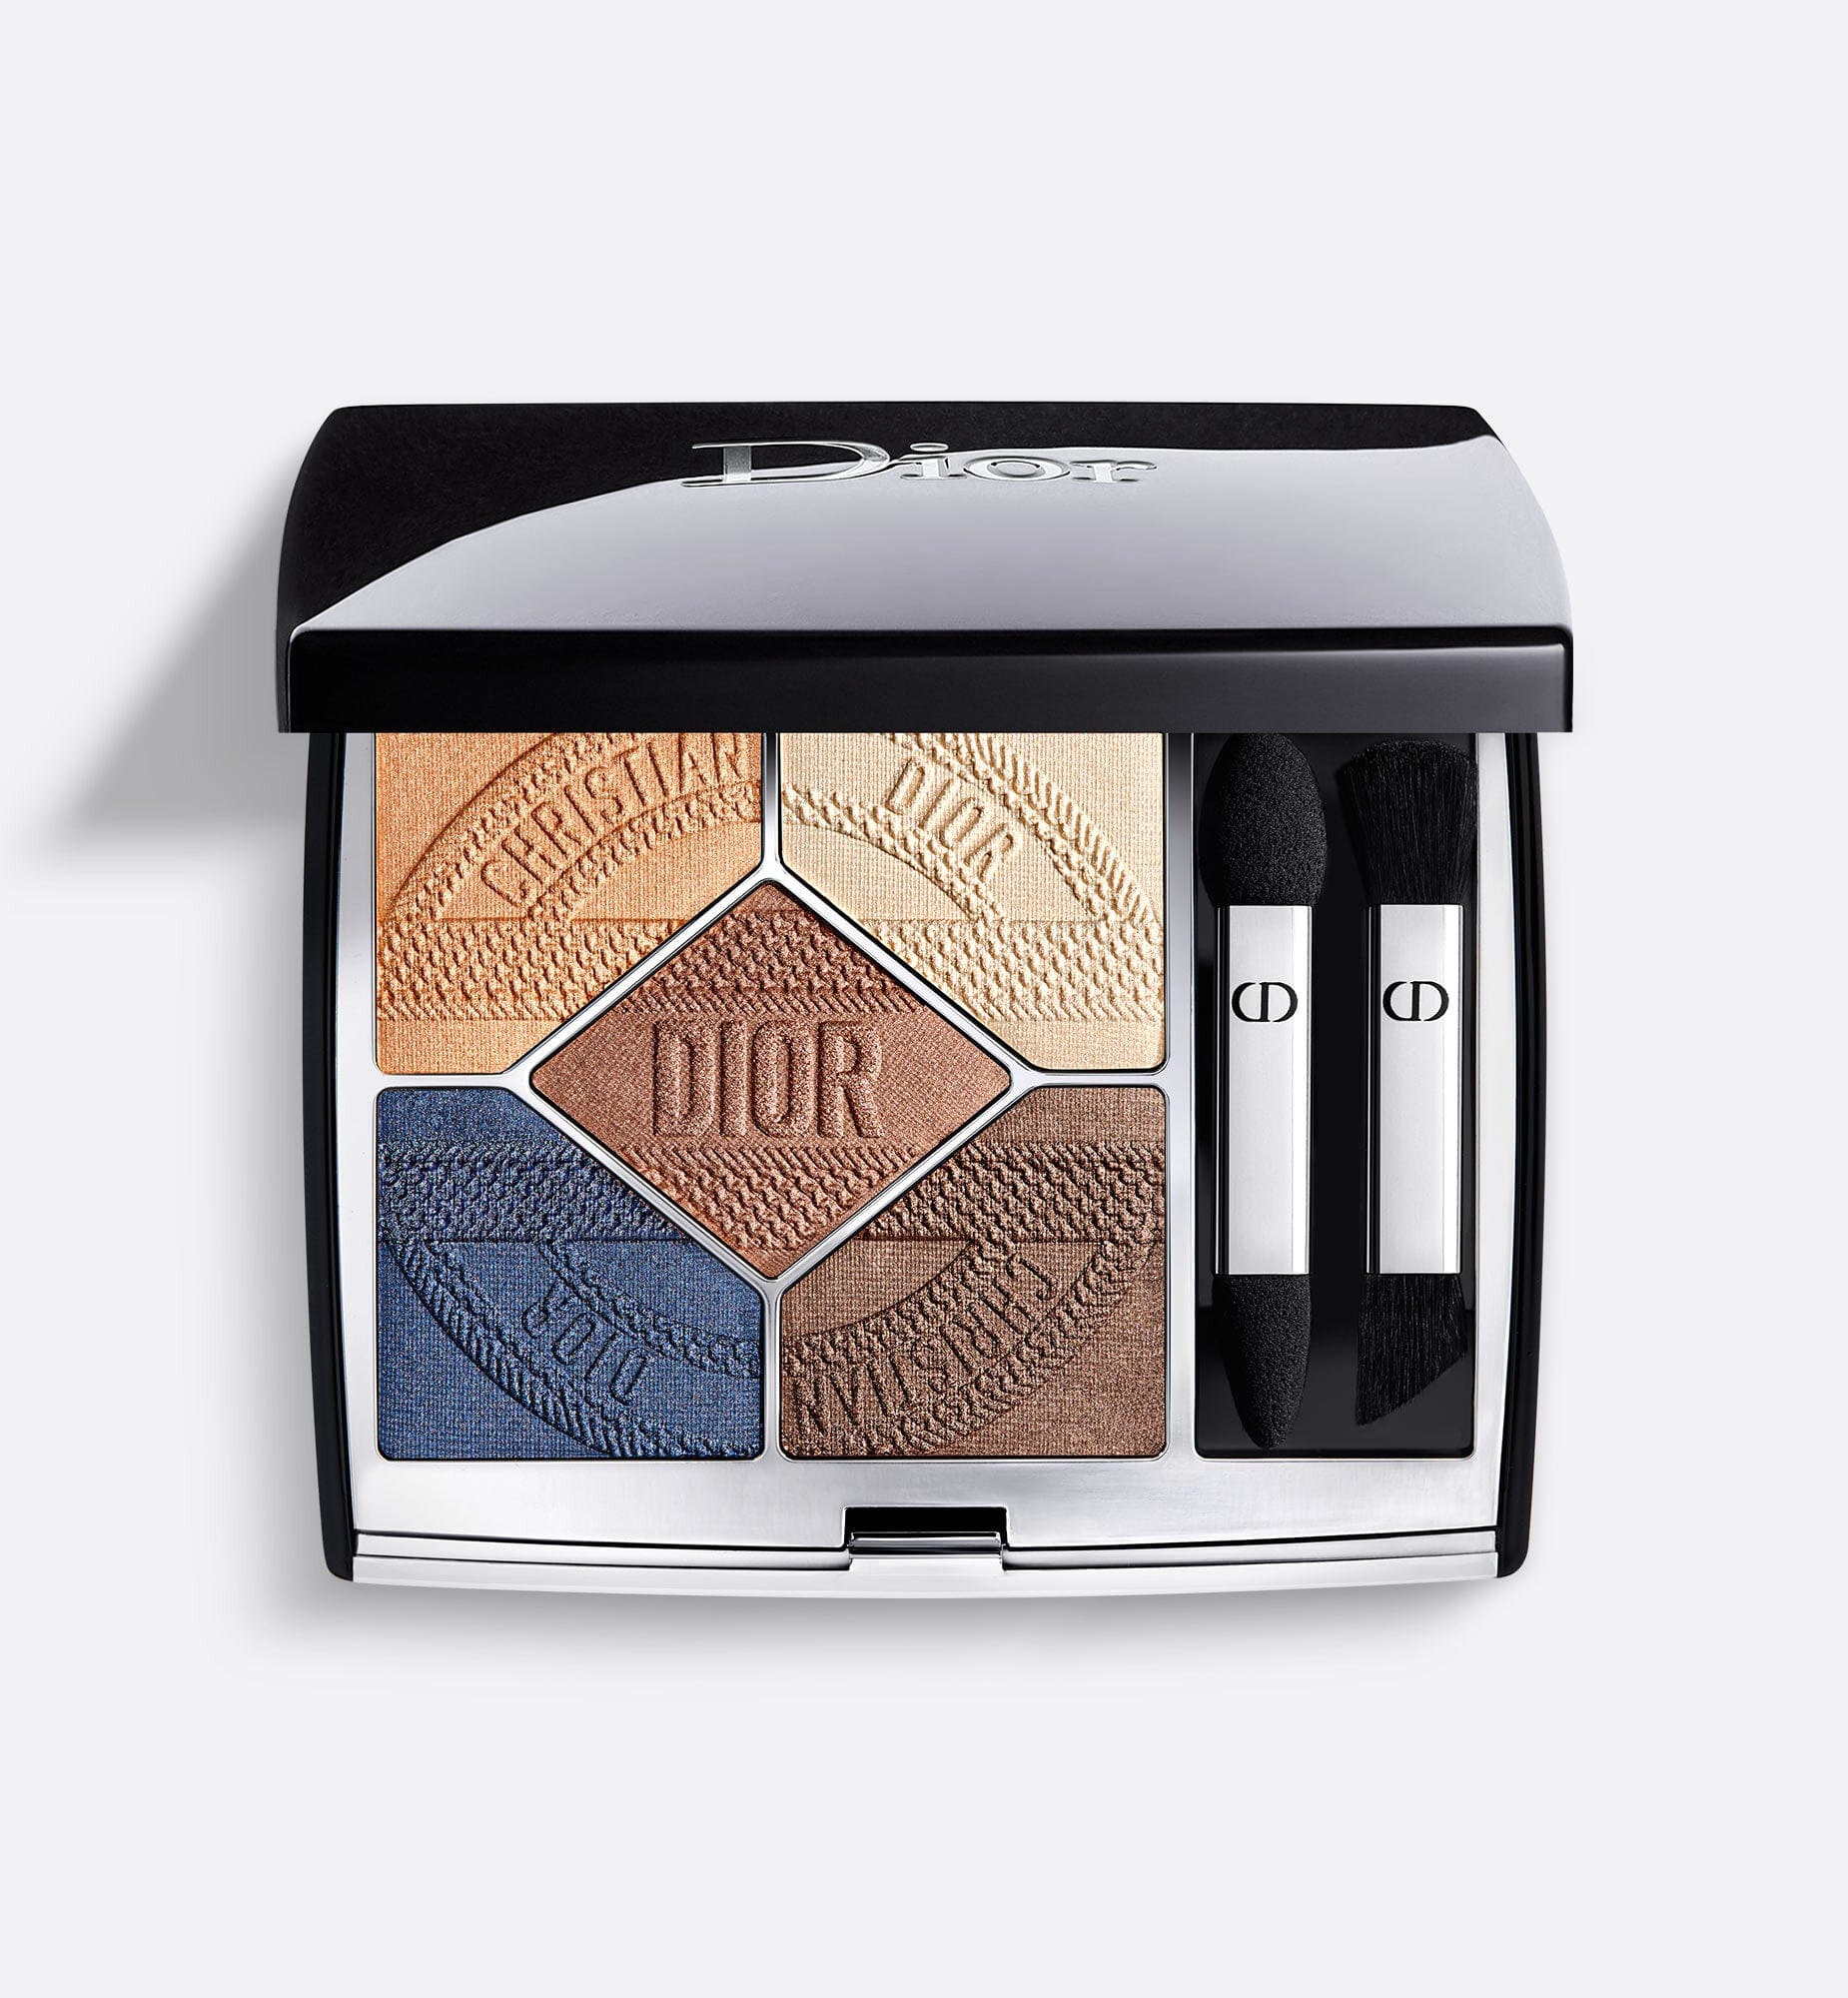 5 Couleurs Couture - Limited Edition | Eyeshadow Palette - 5 Shades - Comfortable and Creamy Powder